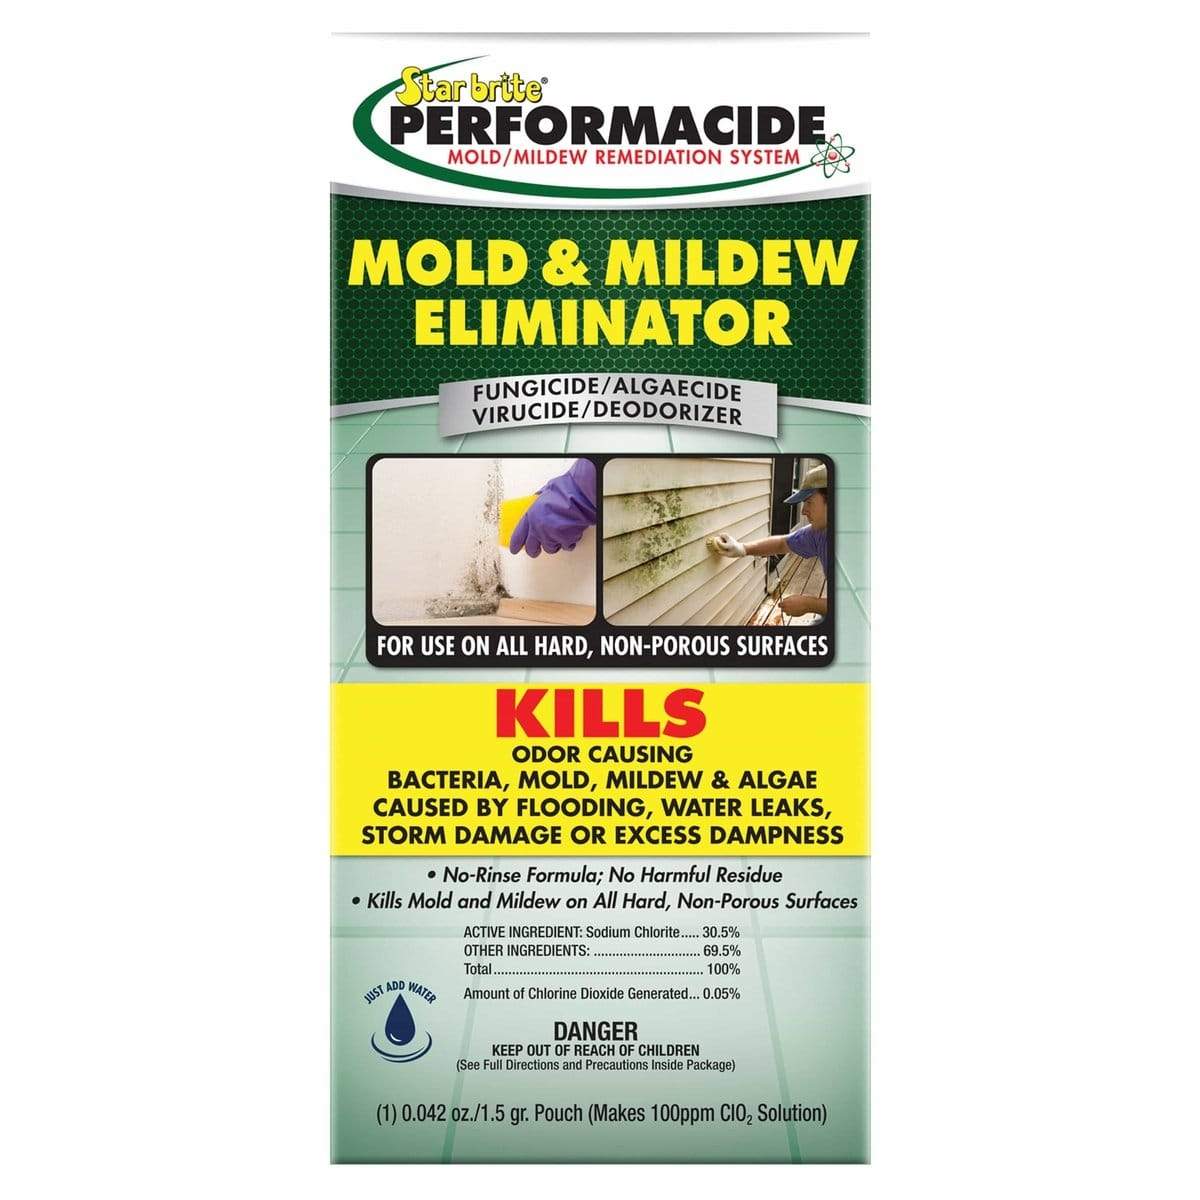 Star Brite Qualifies for Free Shipping Star Brite Performacide Mold and Mildew Eliminator 32 oz Kit #122032